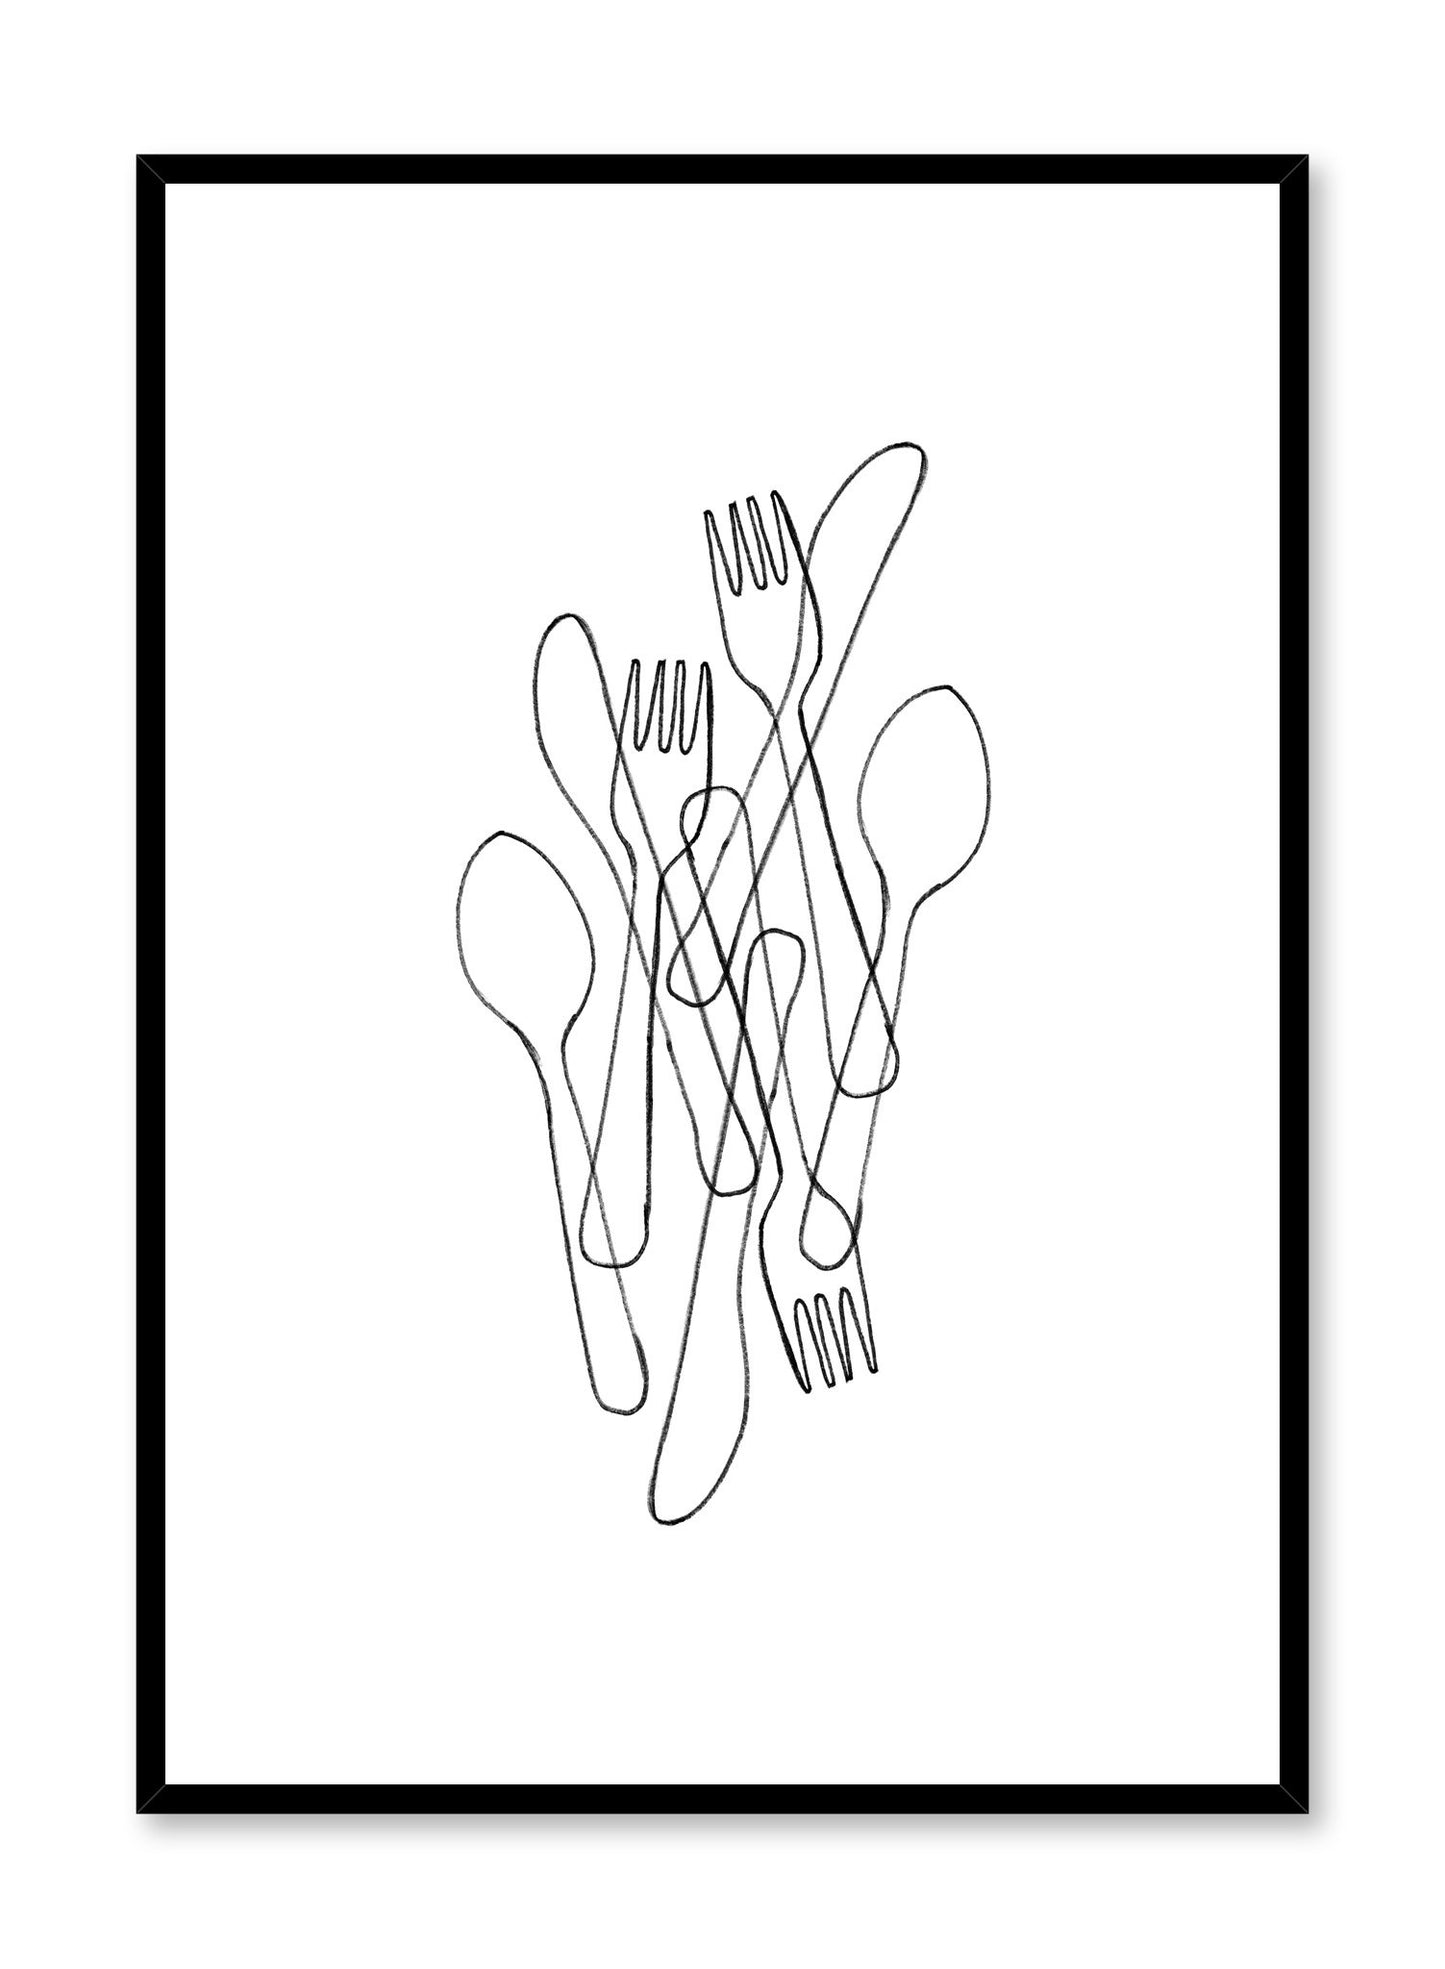 Minimalist poster by Opposite Wall with Forks & Knives black and white illustration